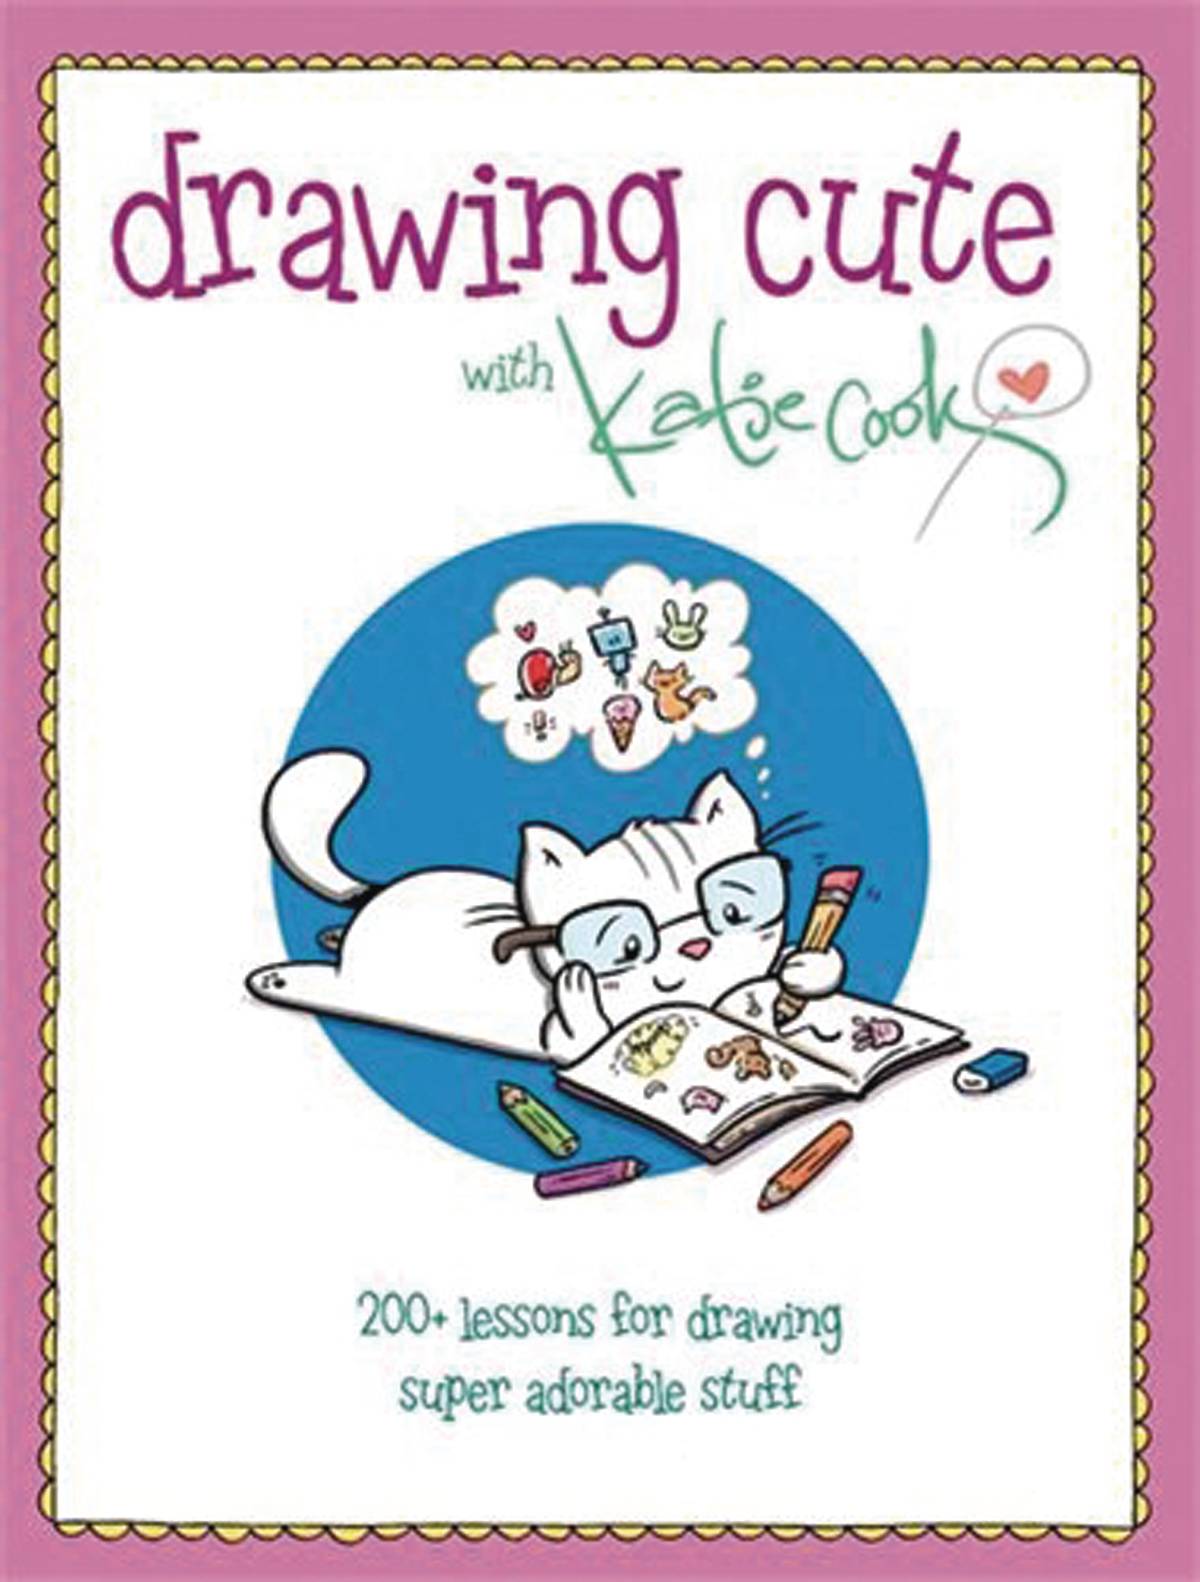 Drawing Cute With Katie Cook Soft Cover